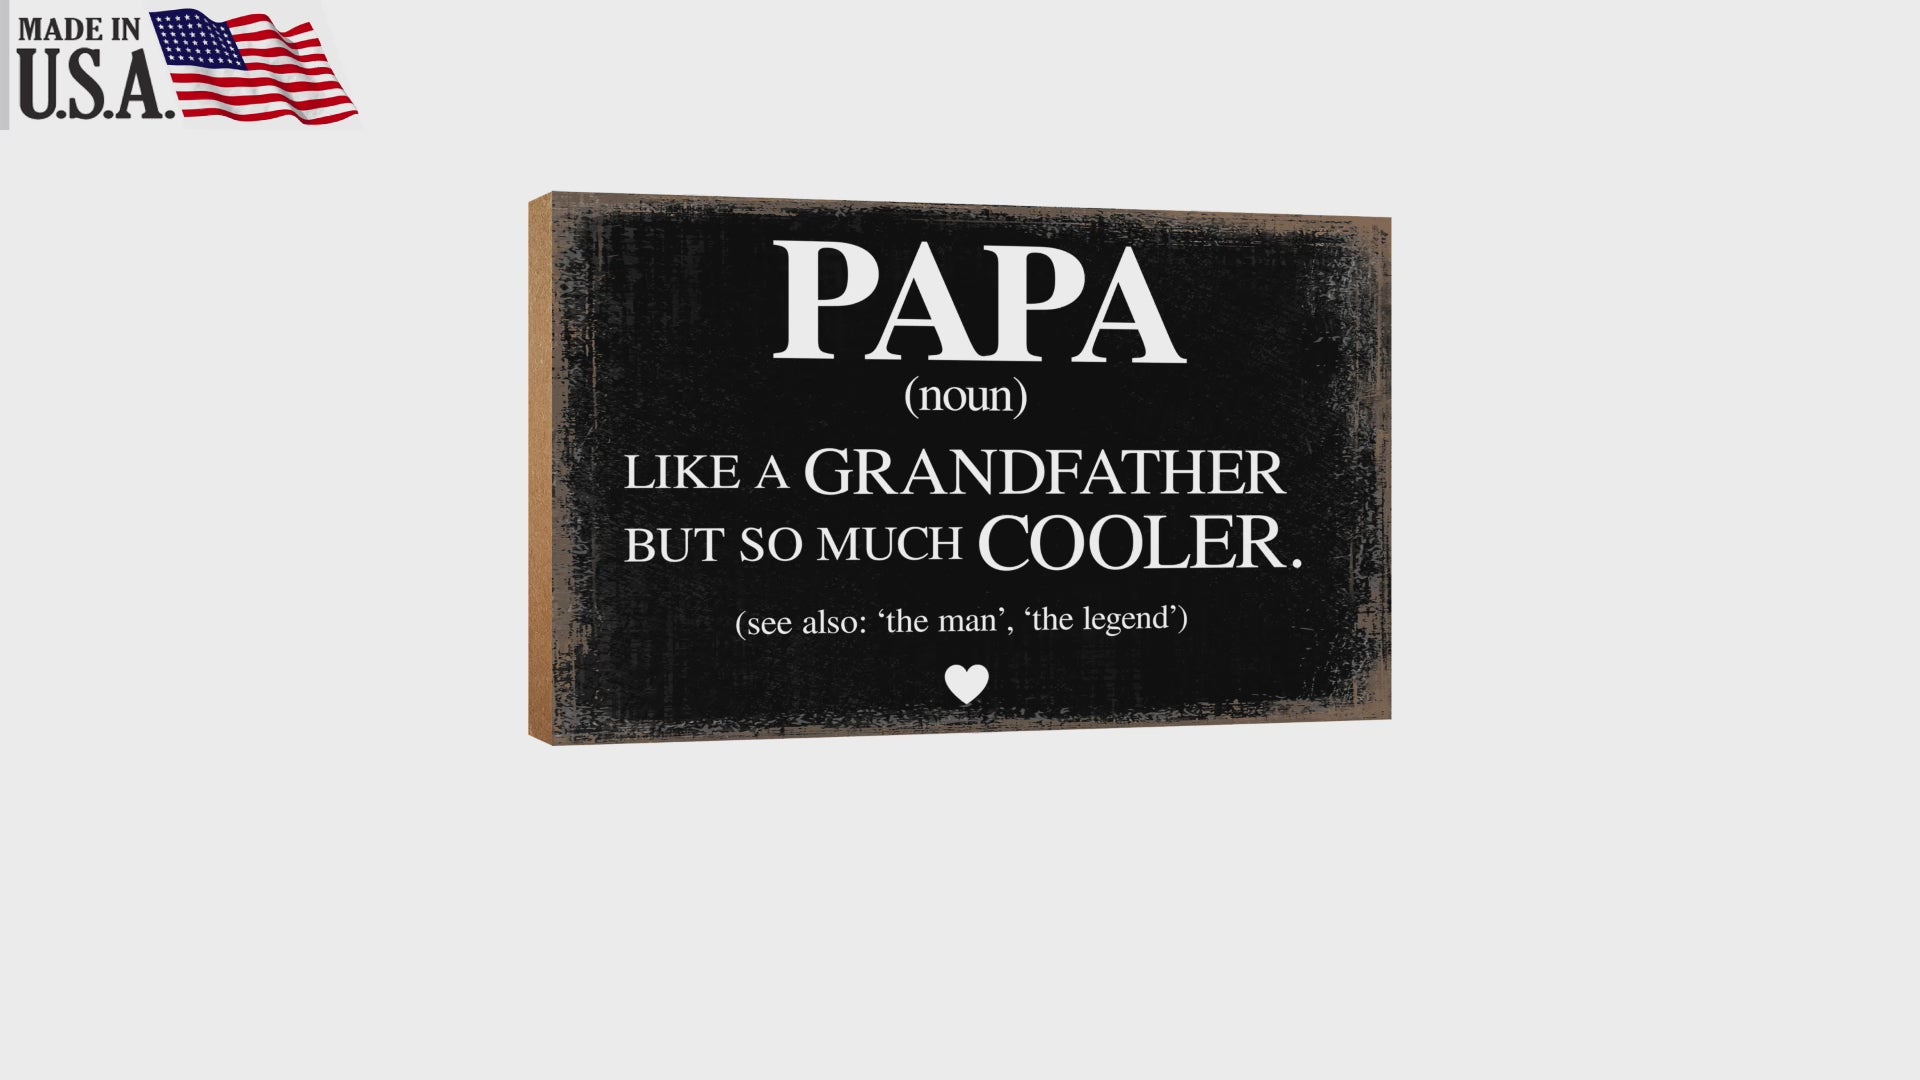 Unique shelf décor for your beloved grandfather, a special gift table decor.